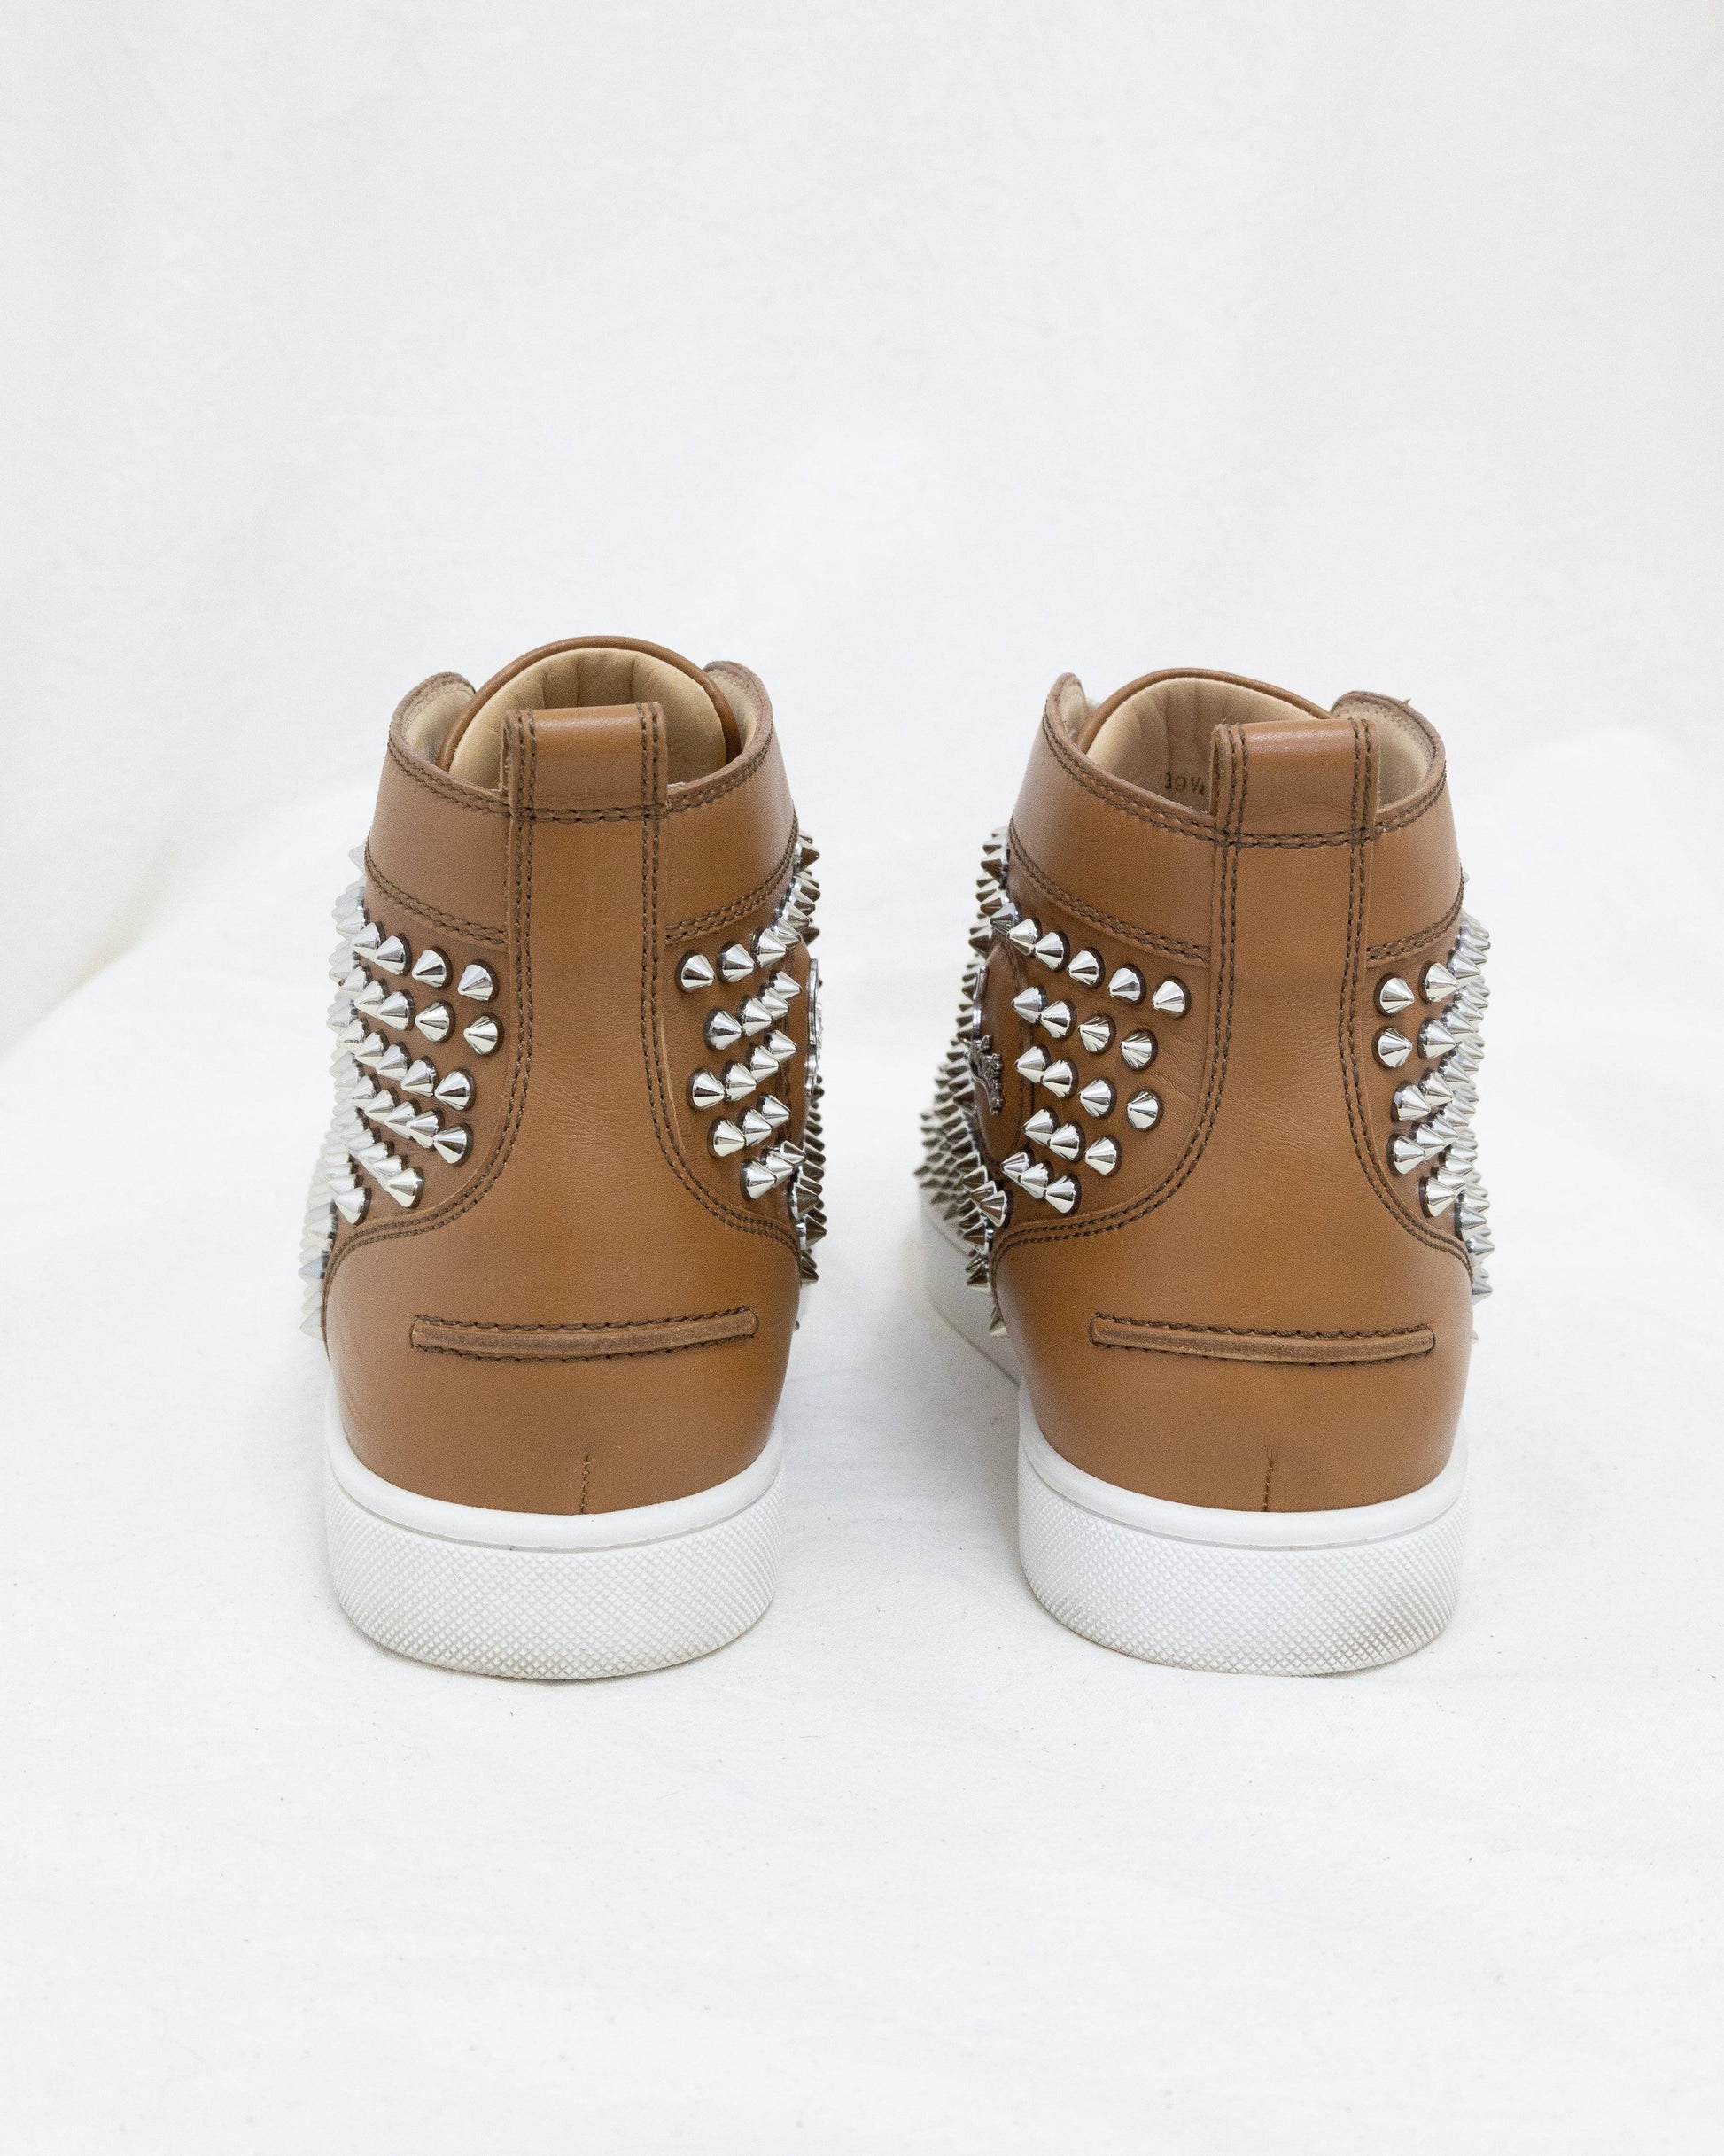 CHRISTIAN LOUBOUTIN Sneakers 39,5 - THE VOG CLOSET